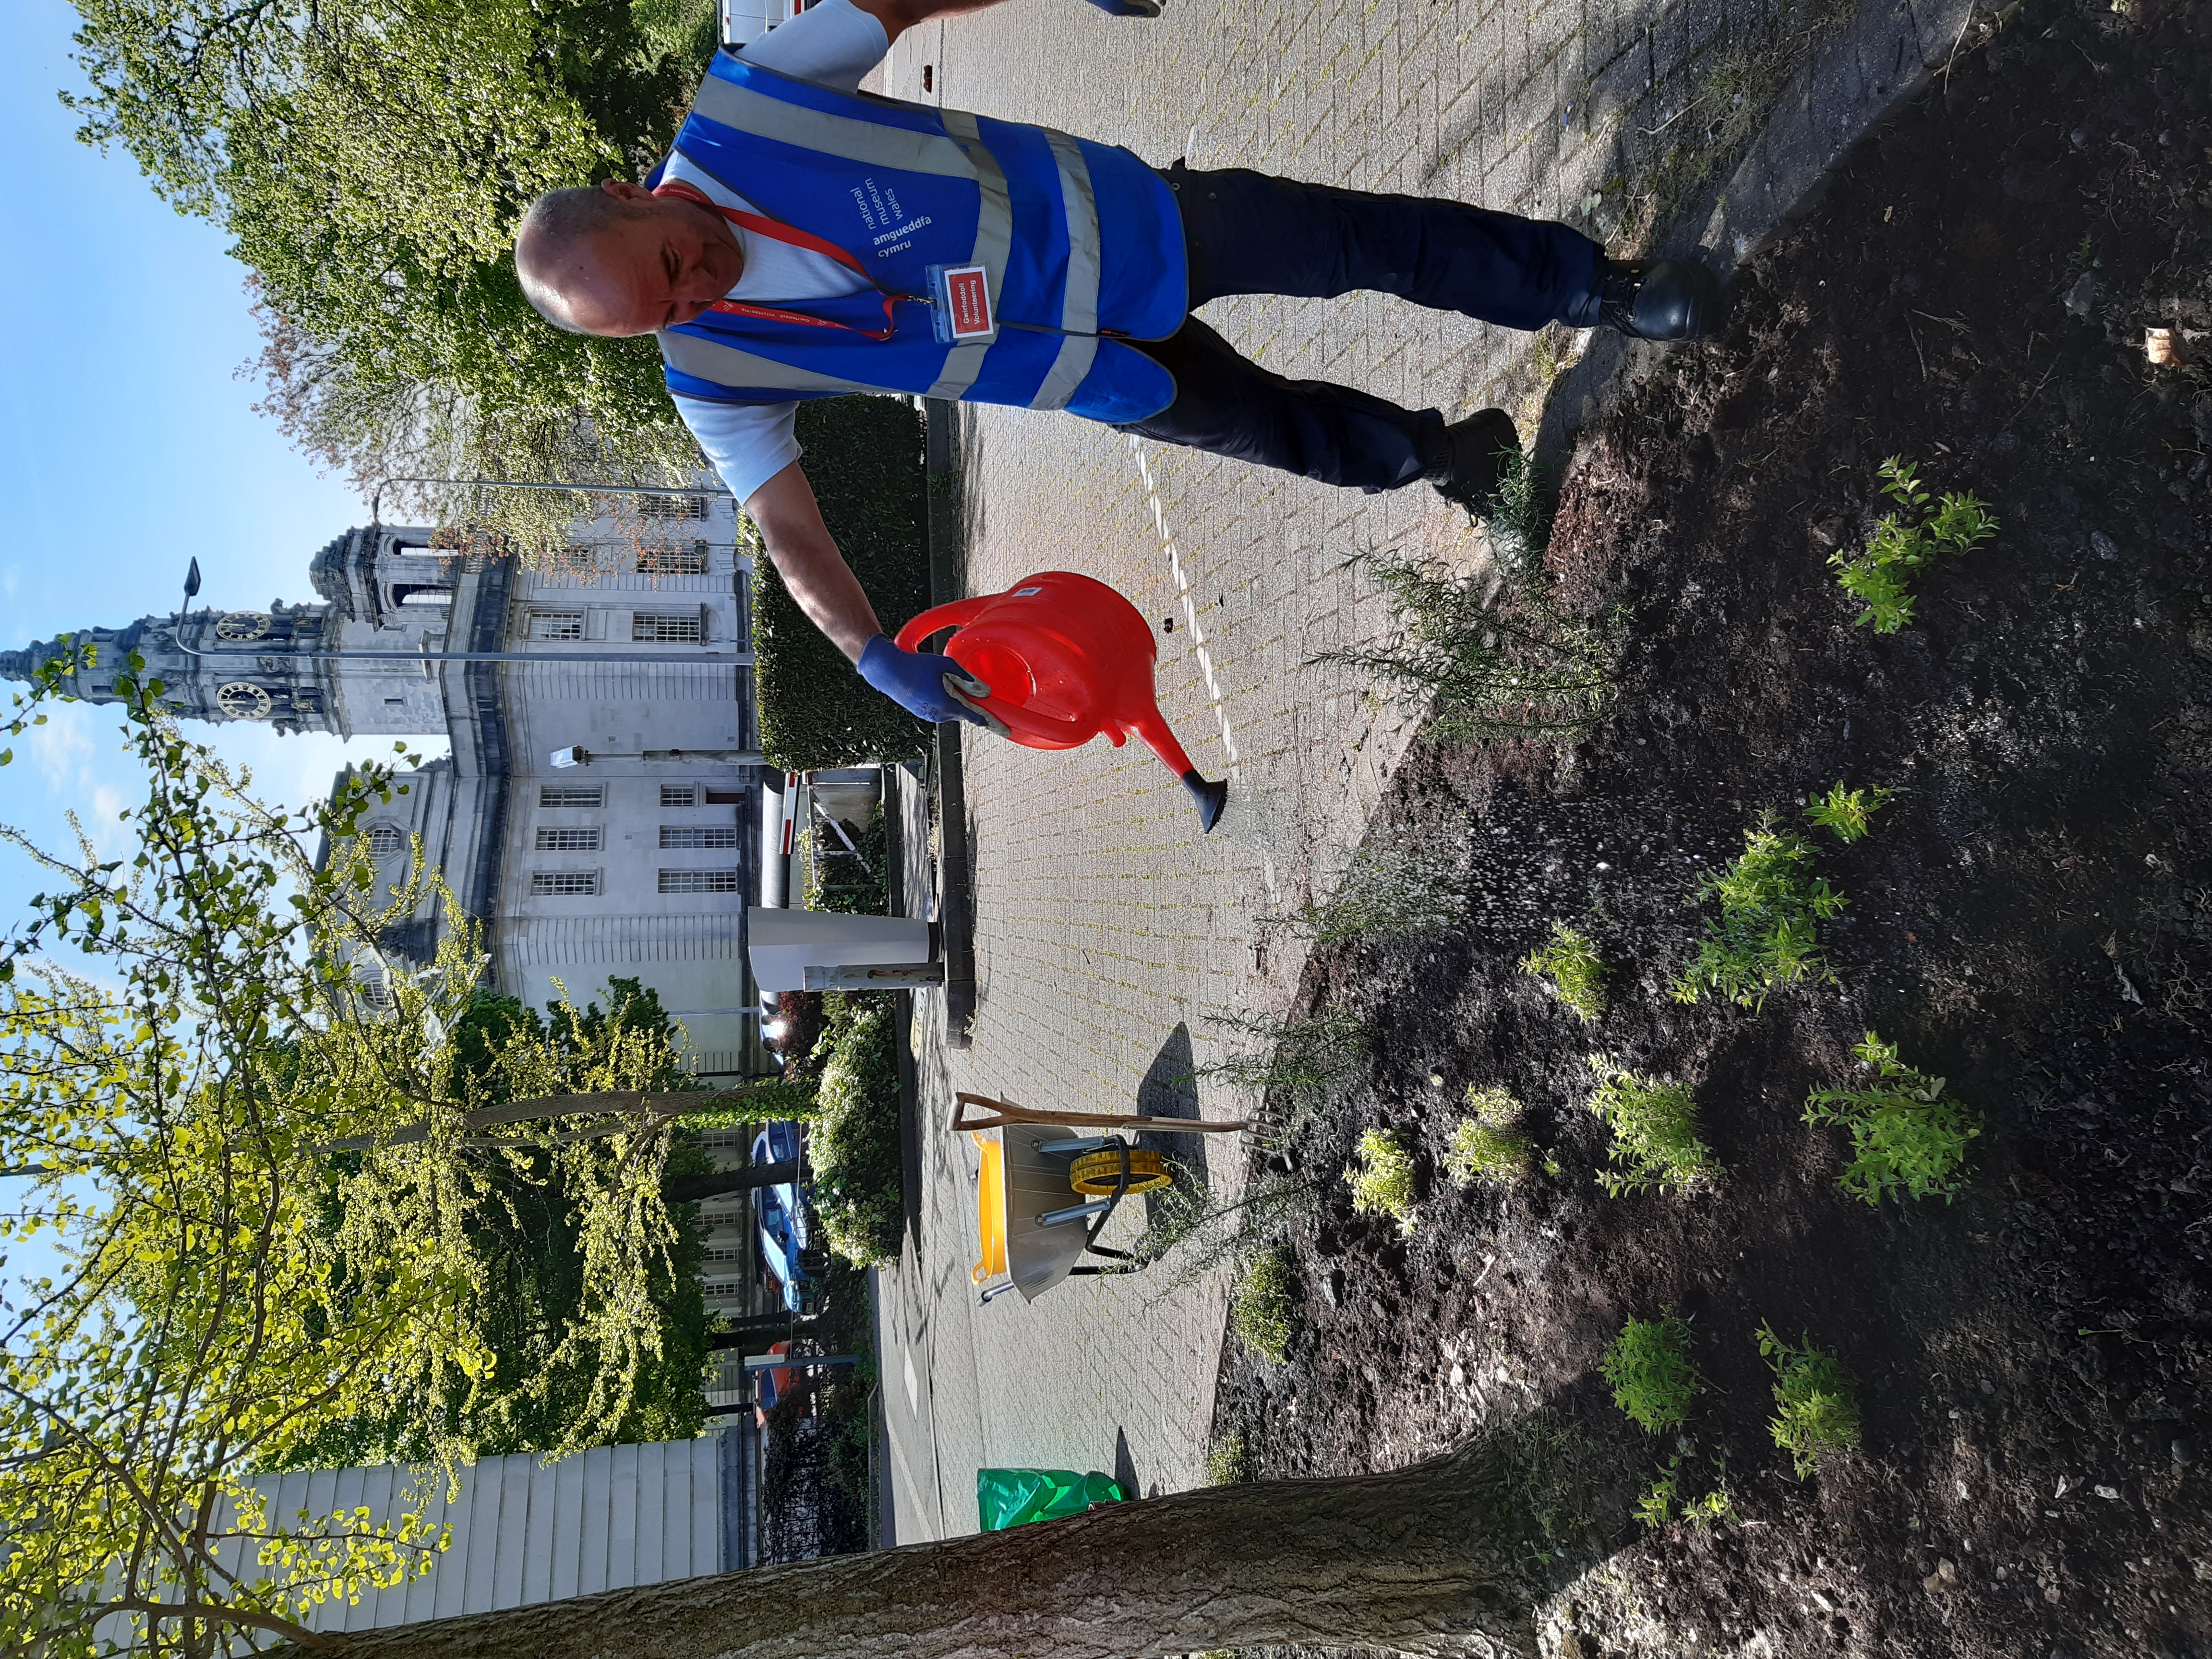 Volunteer watering the newly planted bed with City Hall in the background